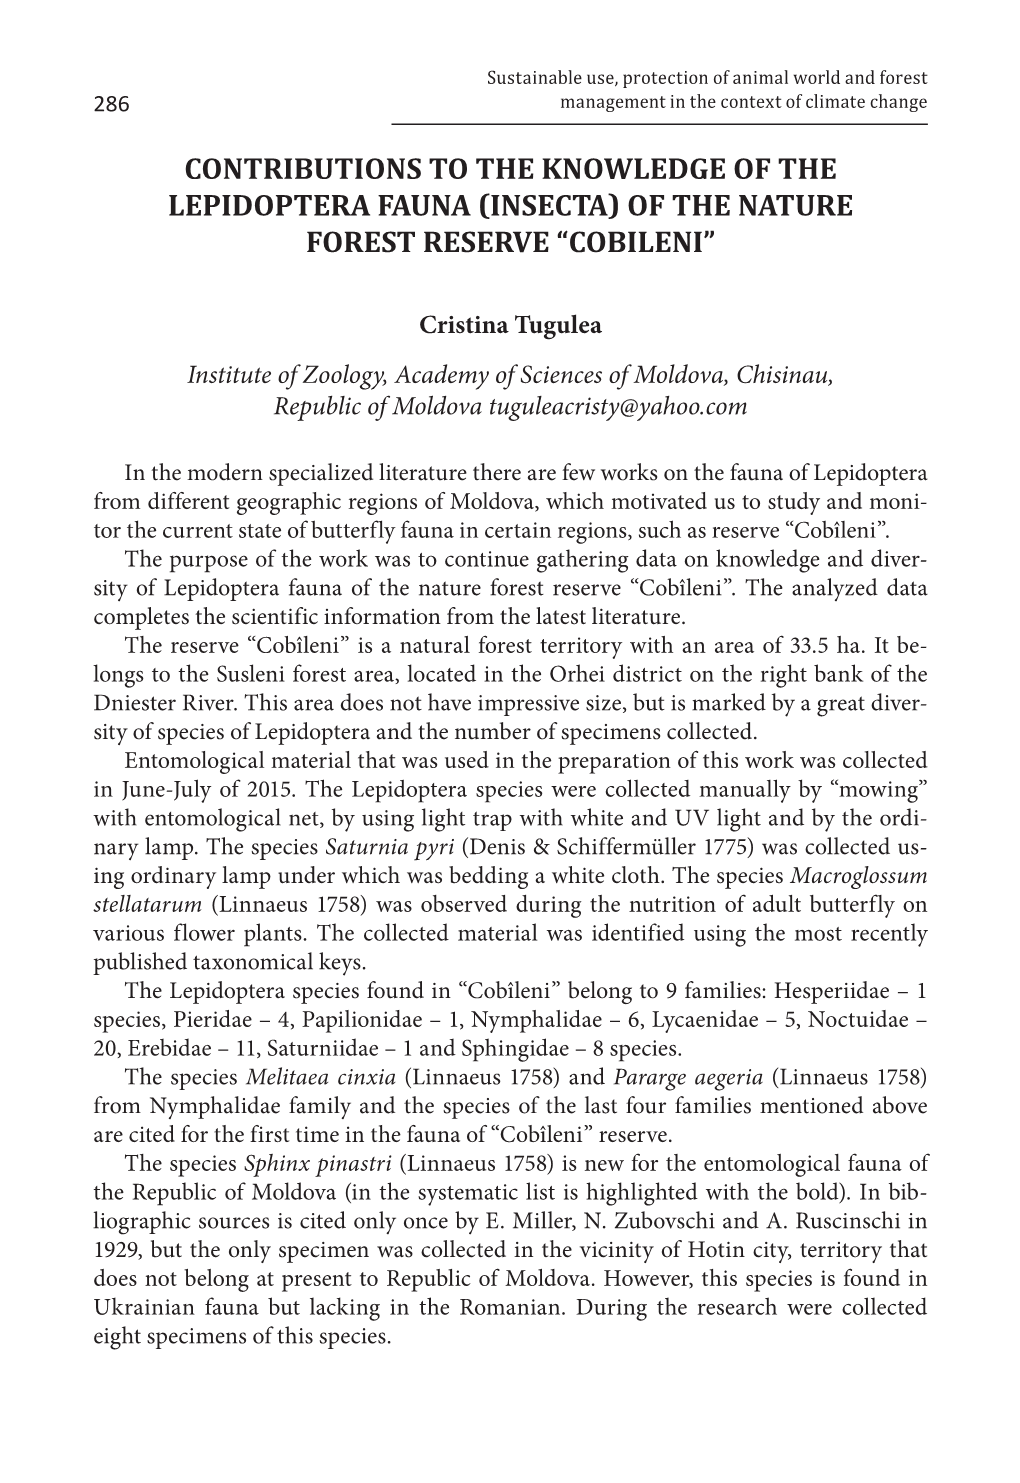 Contributions to the Knowledge of the Lepidoptera Fauna (Insecta) of the Nature Forest Reserve “Cobileni”